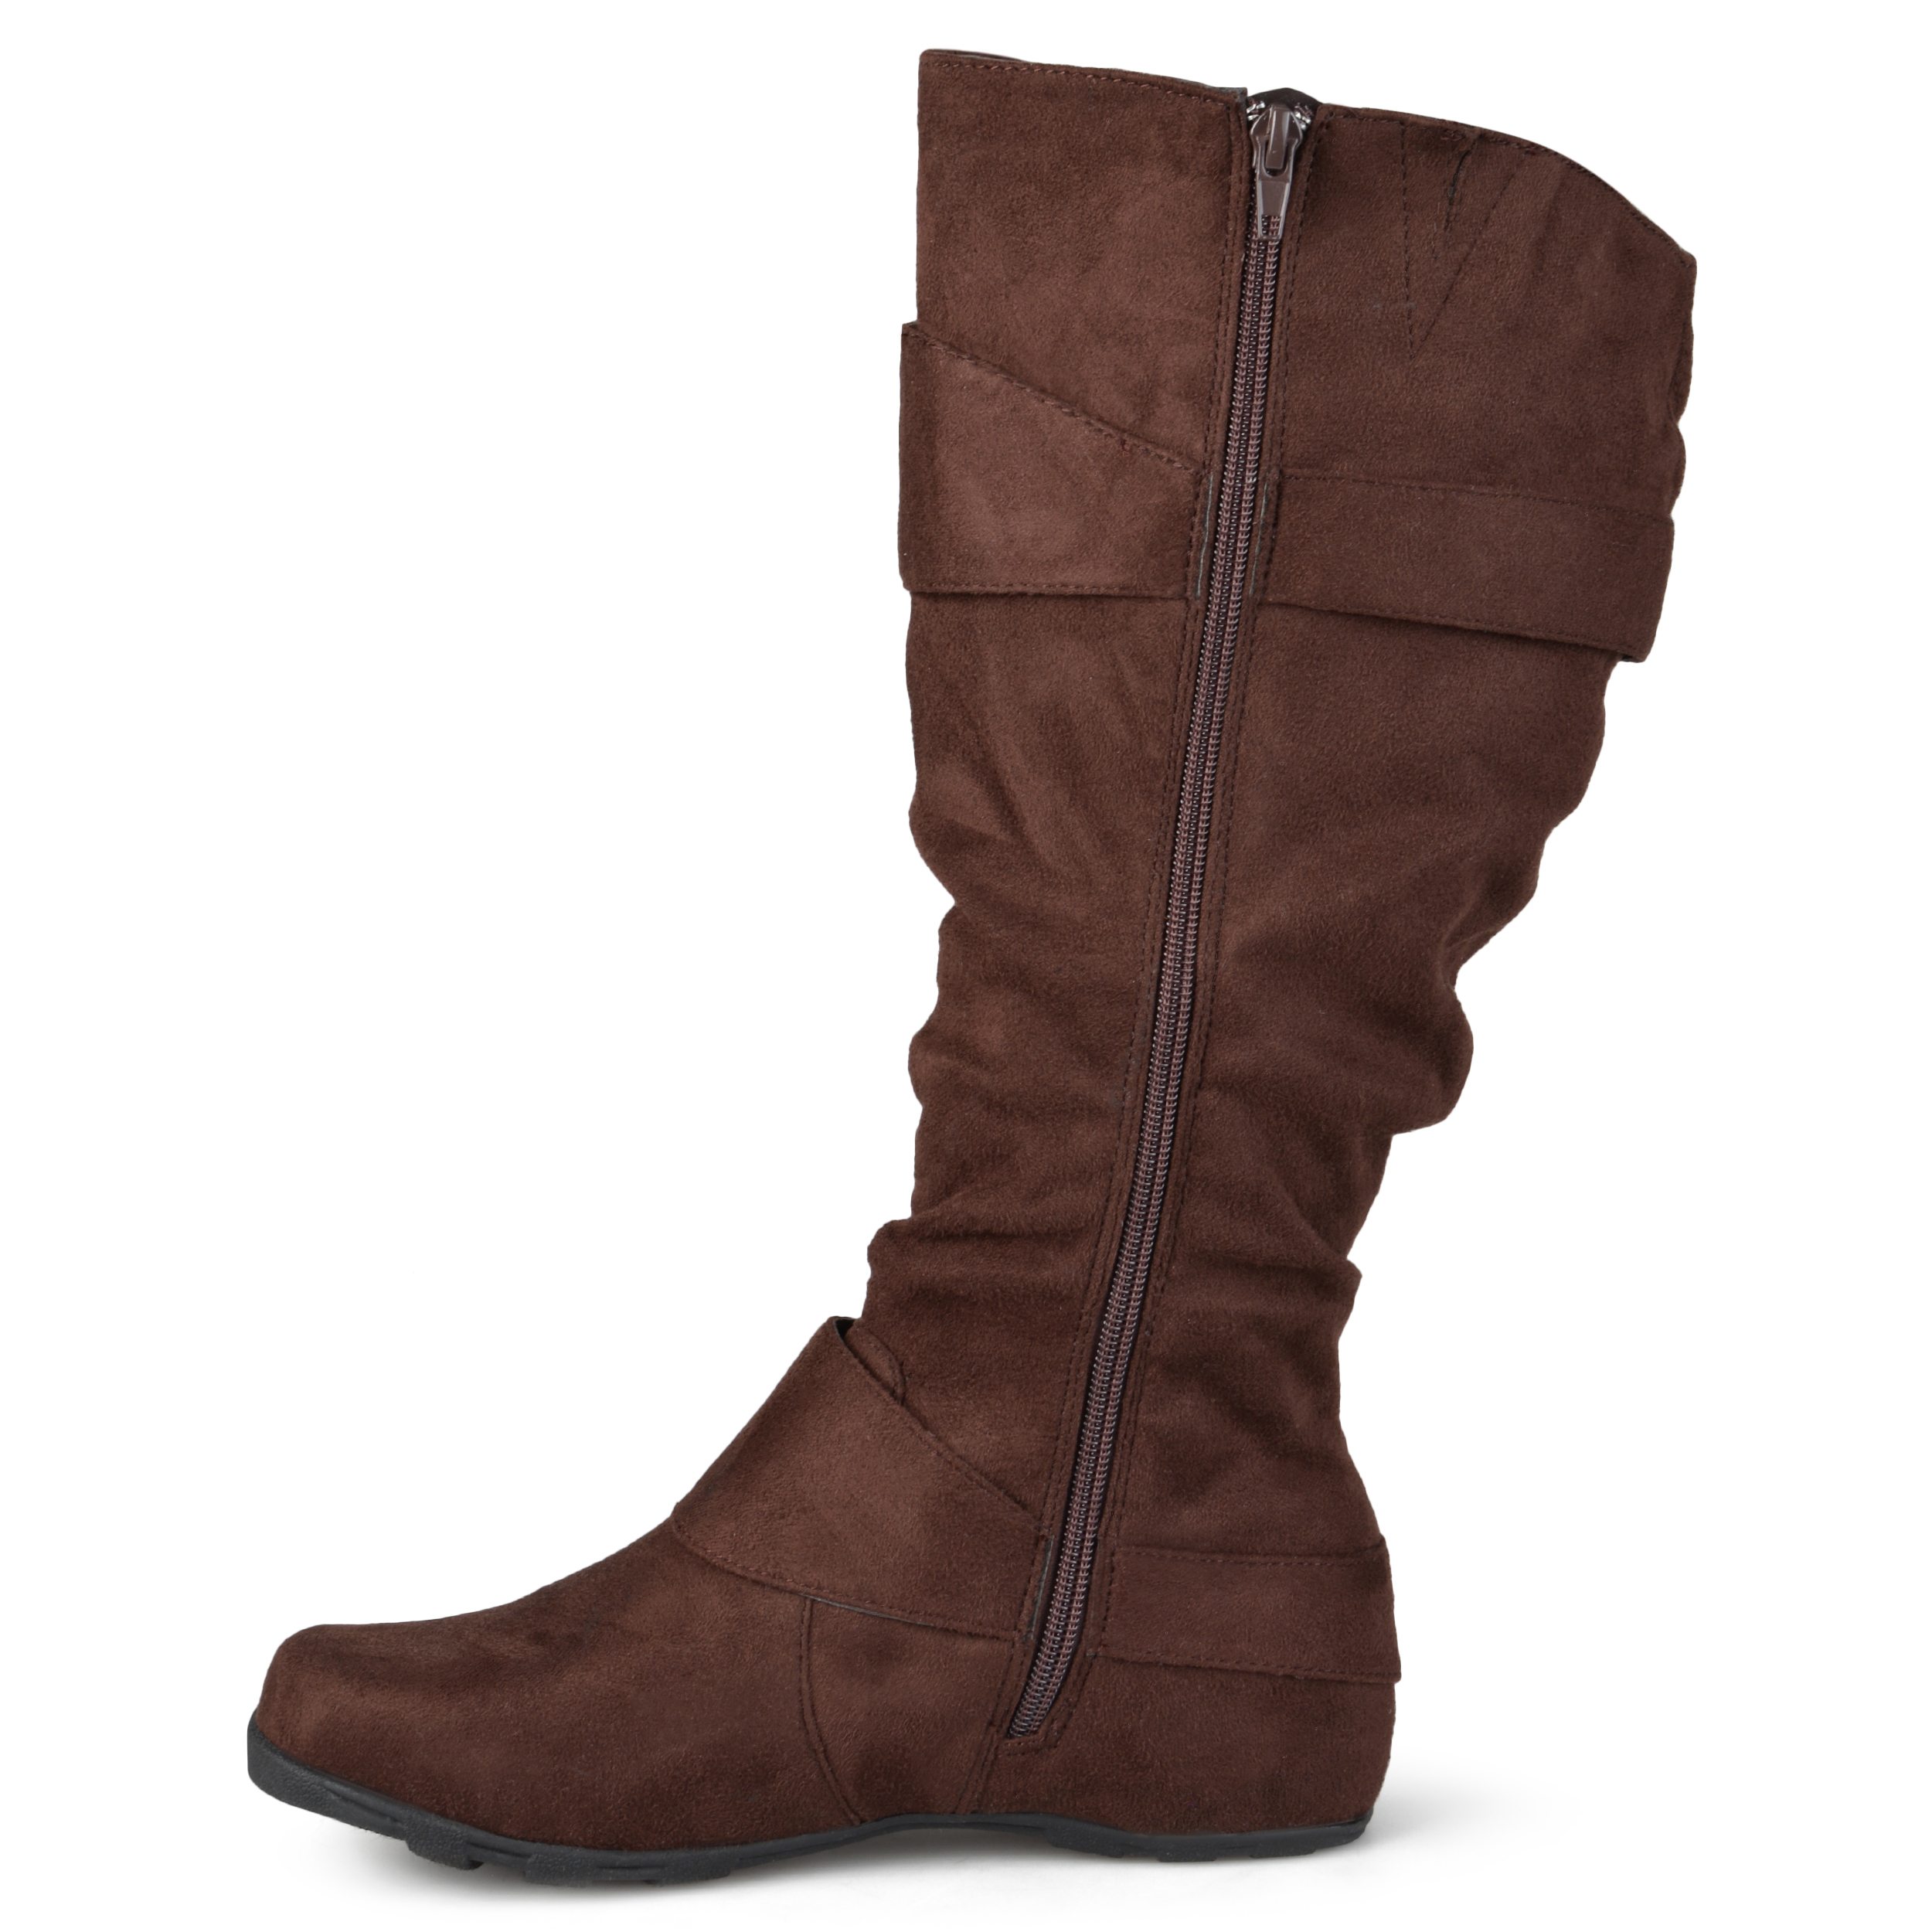 Brinley Co. Womens Wide Calf Dress Boot - image 3 of 8